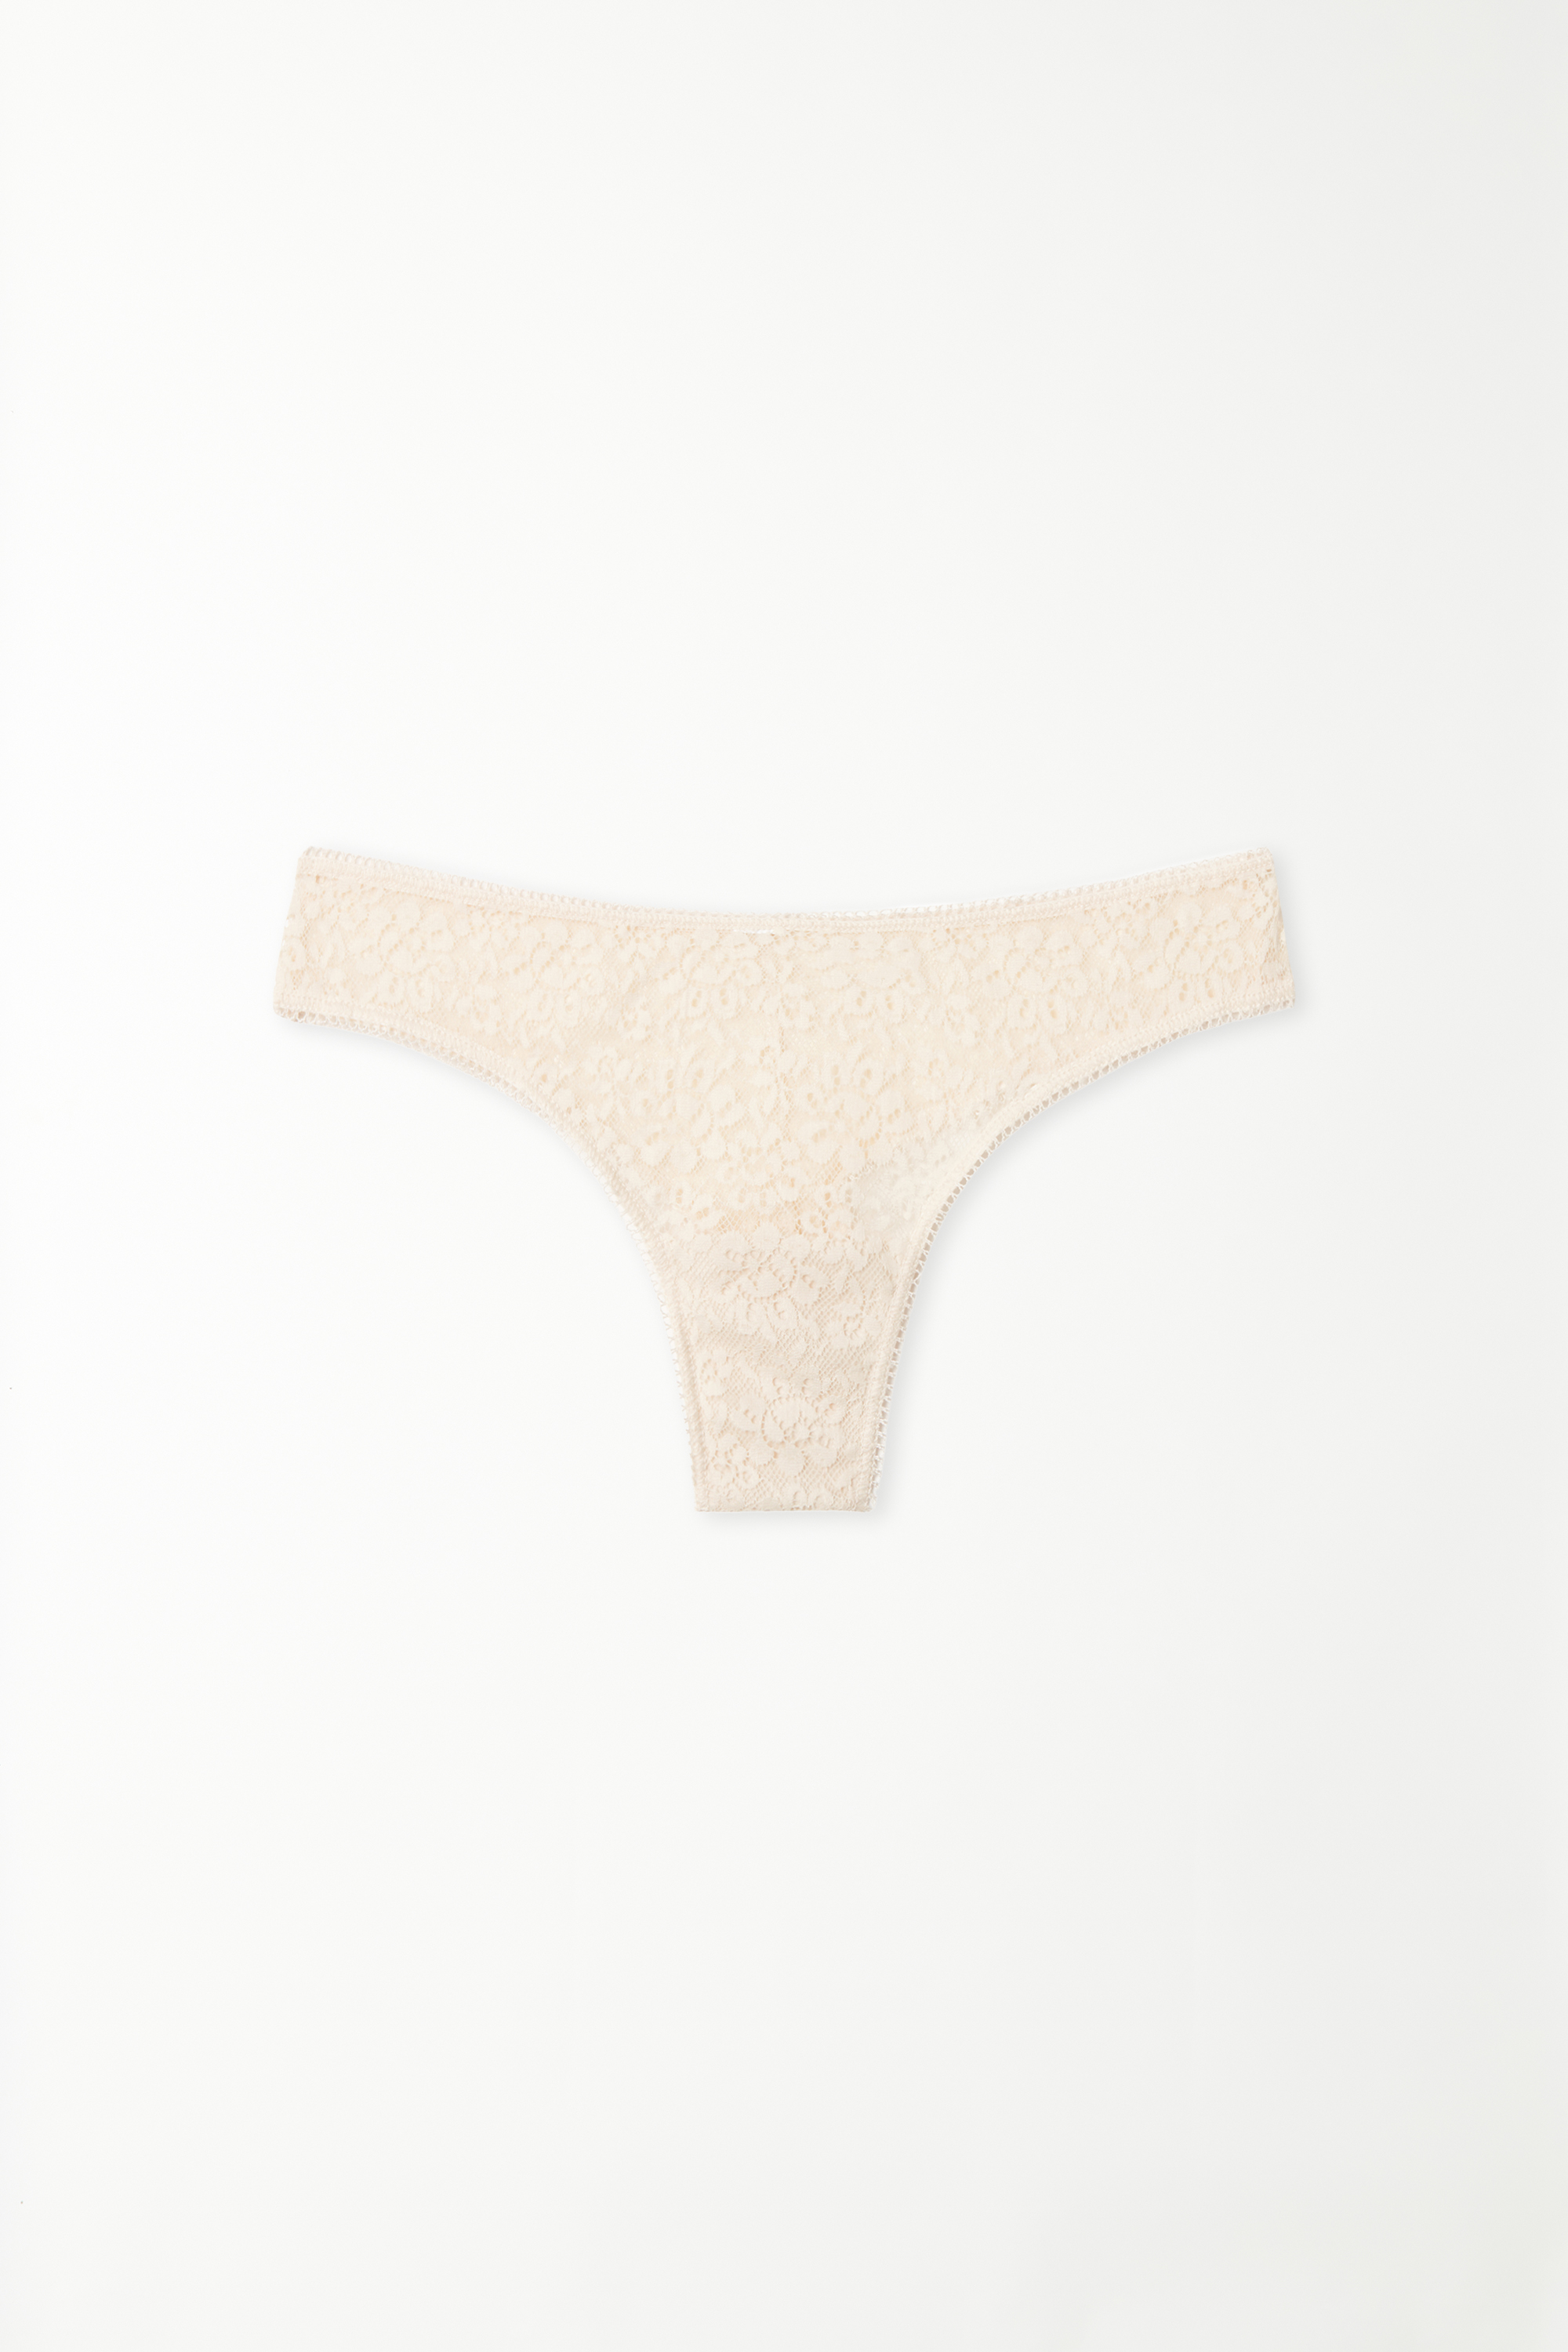 Recycled Lace Brazilian Briefs